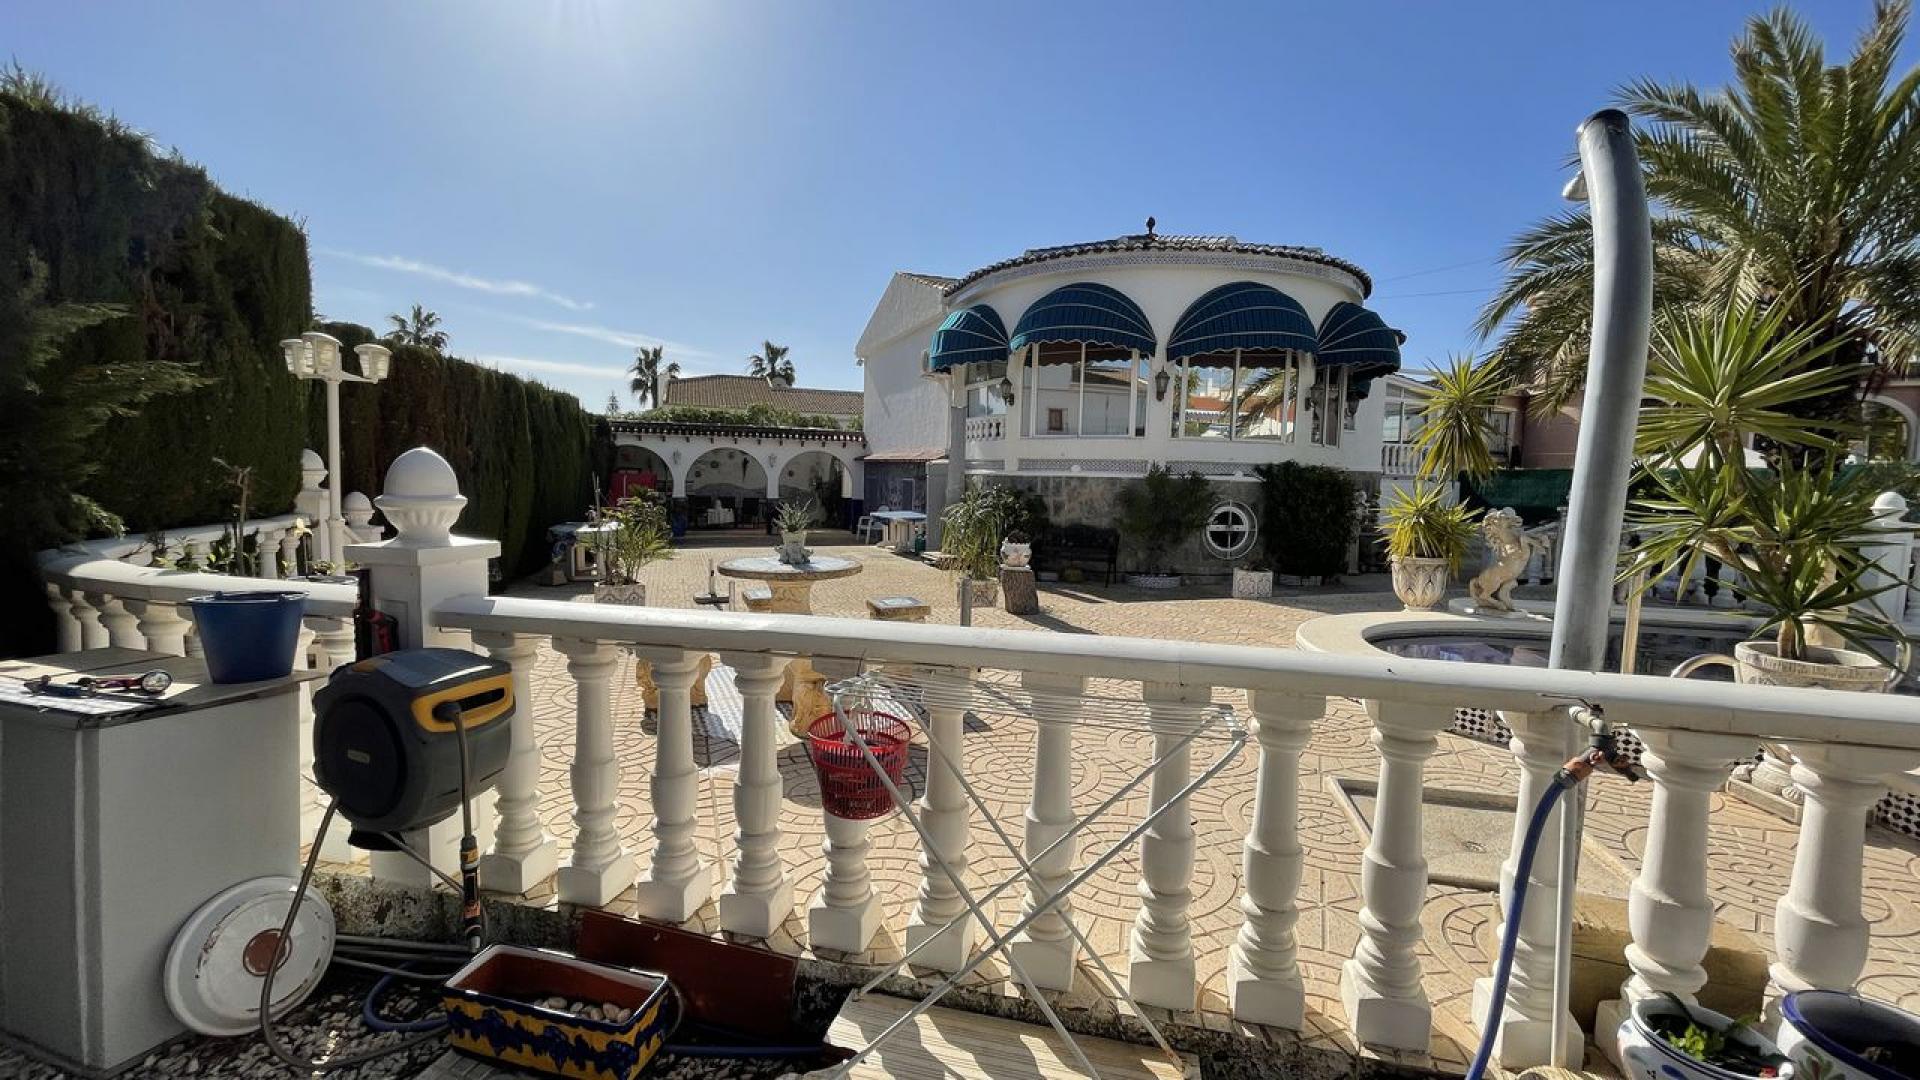 San Luis, Detached villa of 170m2 with a 985m2 plot and a 10x6 pool